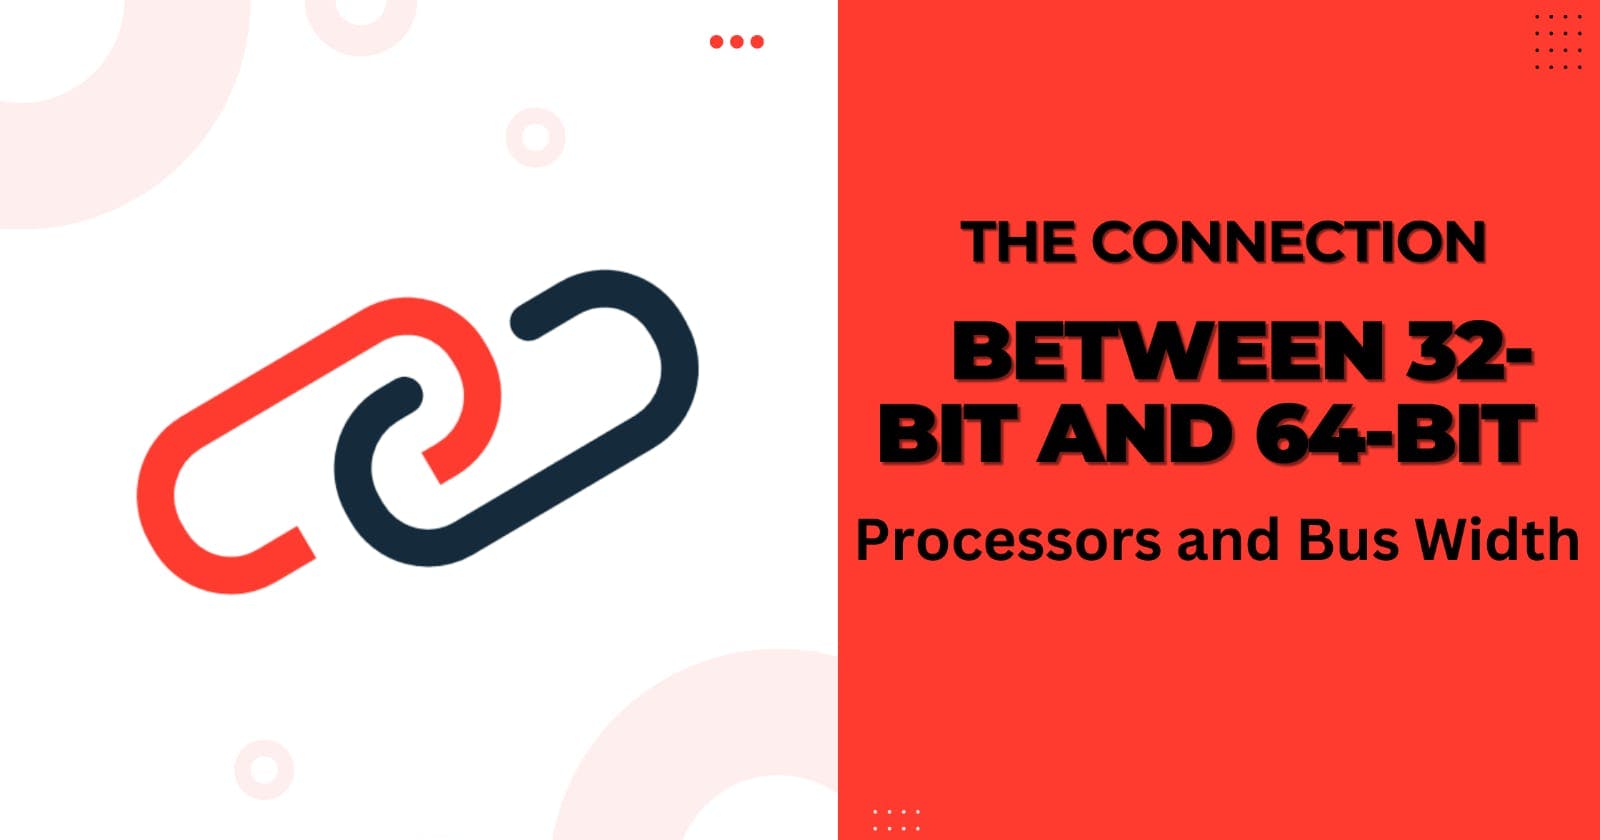 The Connection Between 32-bit and 64-bit Processors and Bus Width